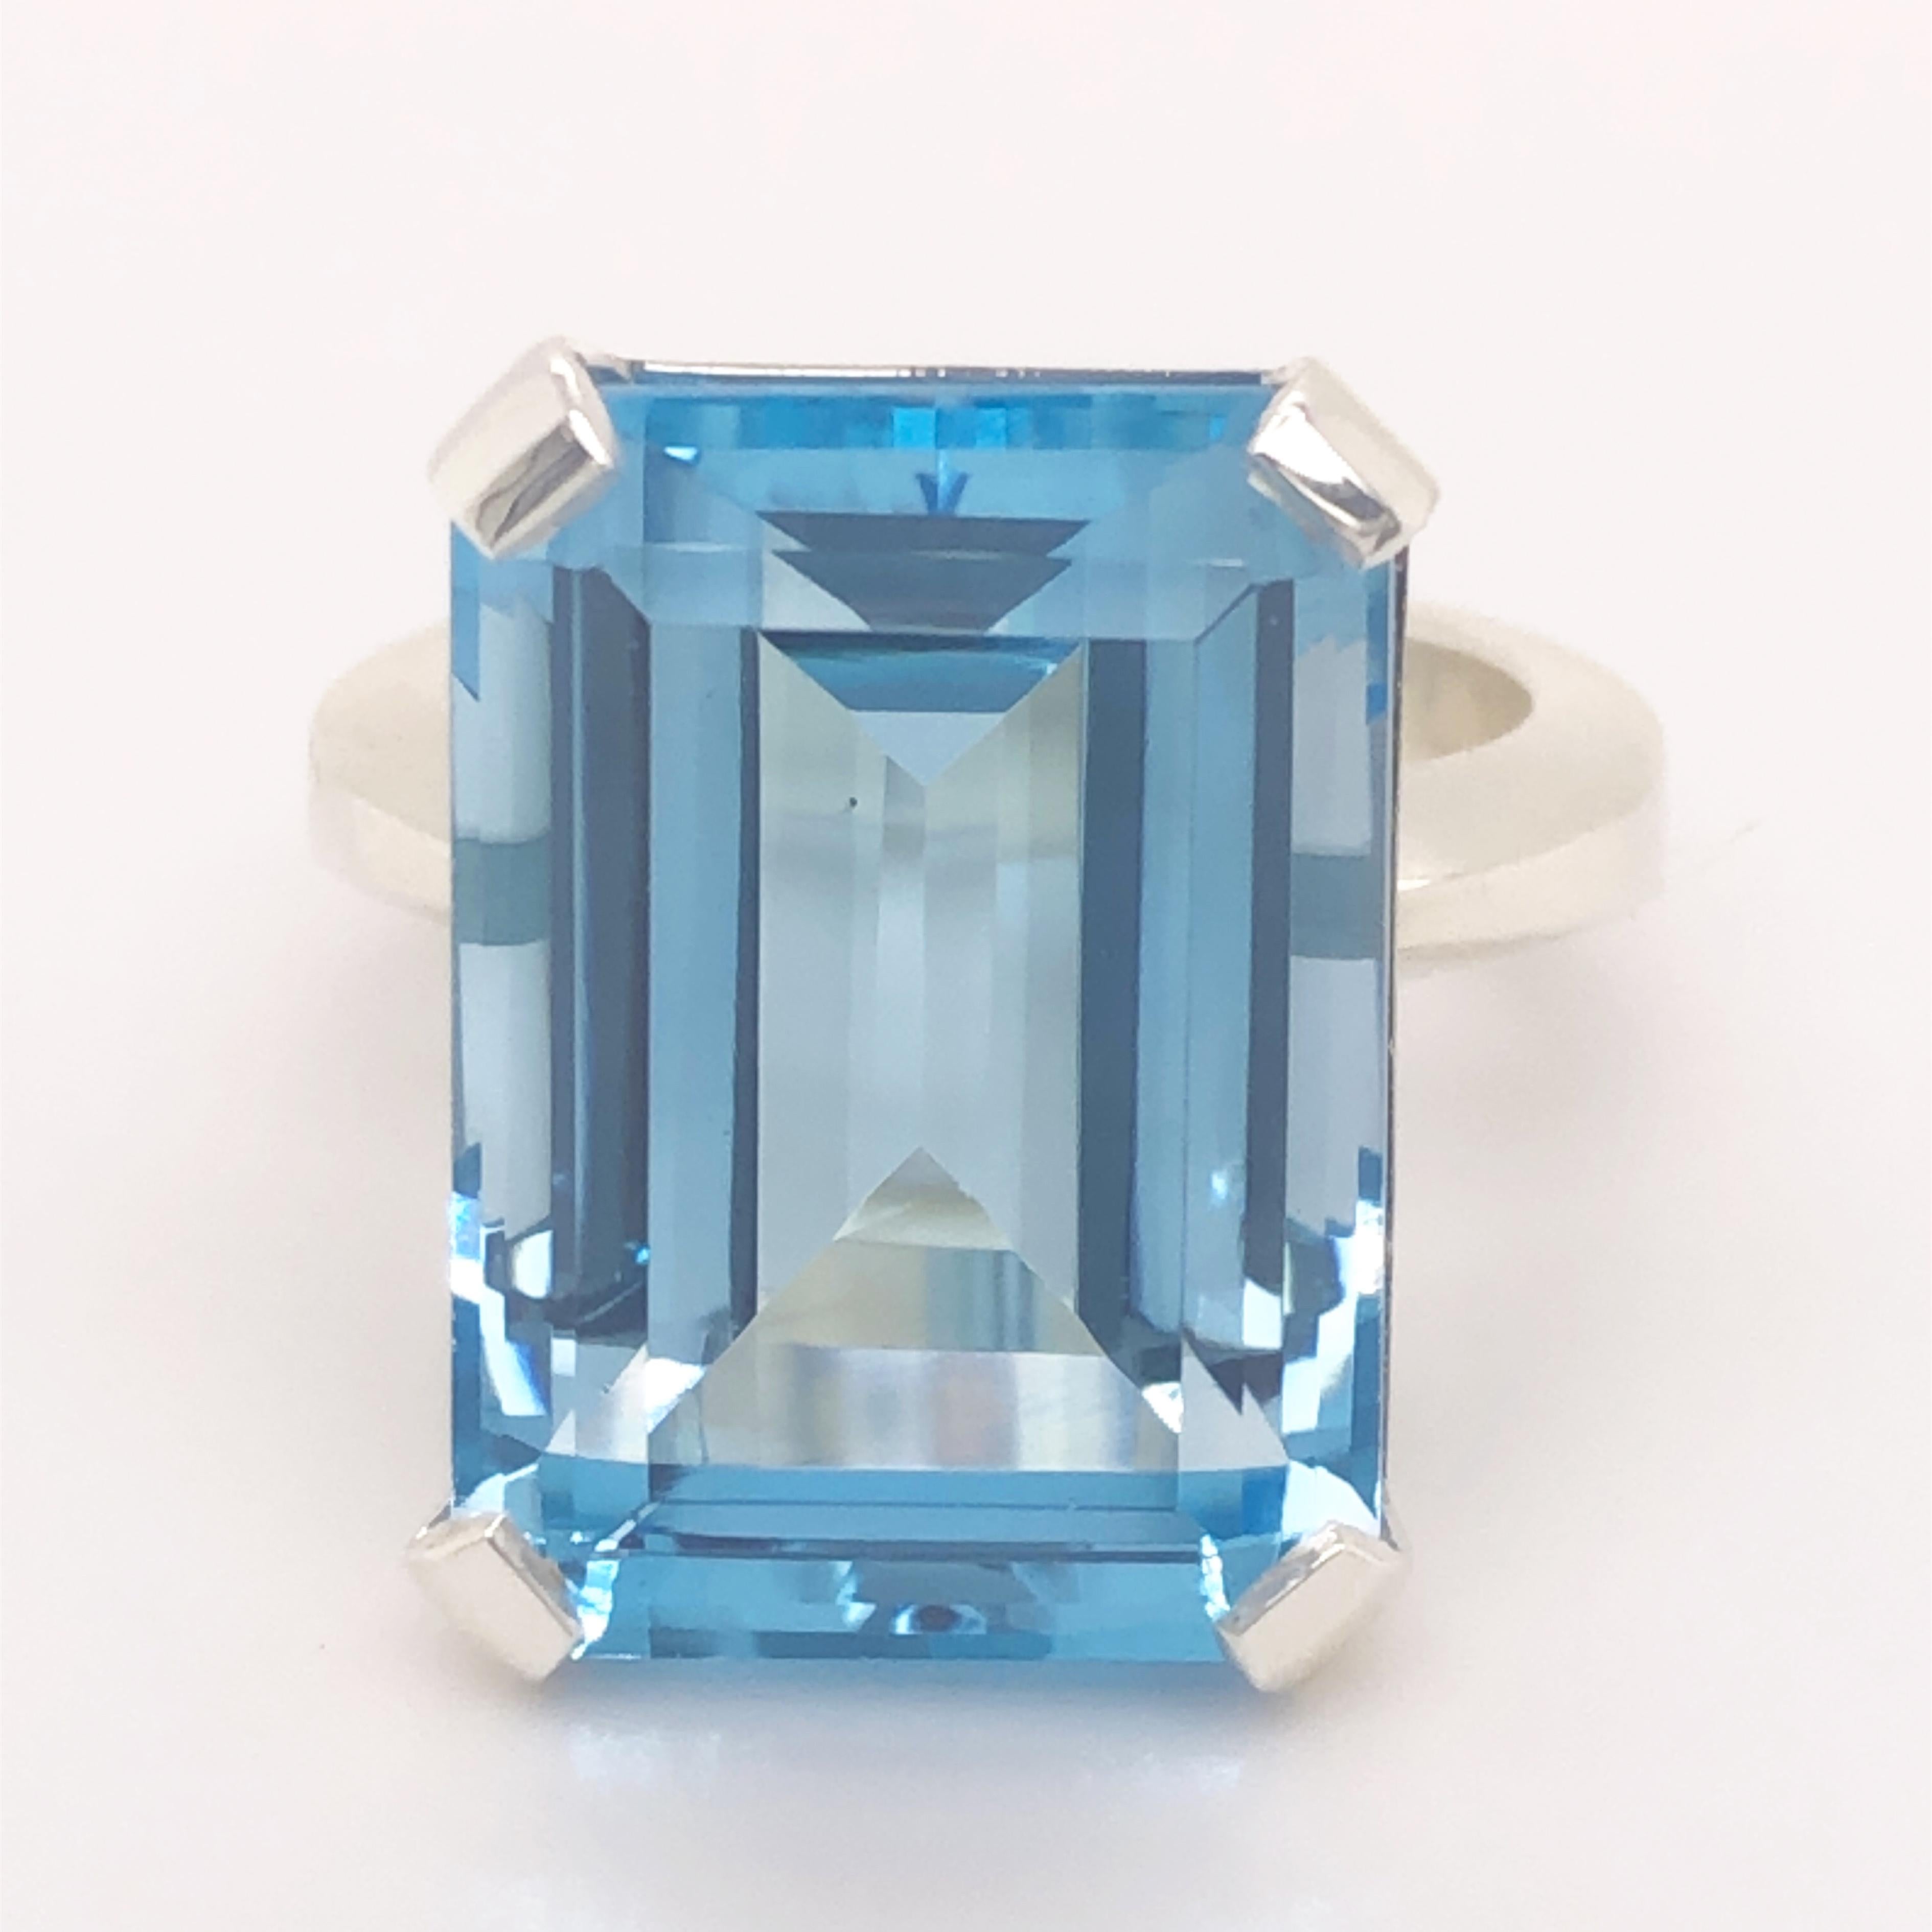 One-of-a-kind 20.2 Carat Emerald Cut Natural Light Blue Topaz(0.708inches lenght 0.508inches width, 18.1x13.30mm) in a Chic yet Timeless mirror Finish Sterling Silver Cocktail Setting.
We are proud to offer this awesome piece perfect as Engagement